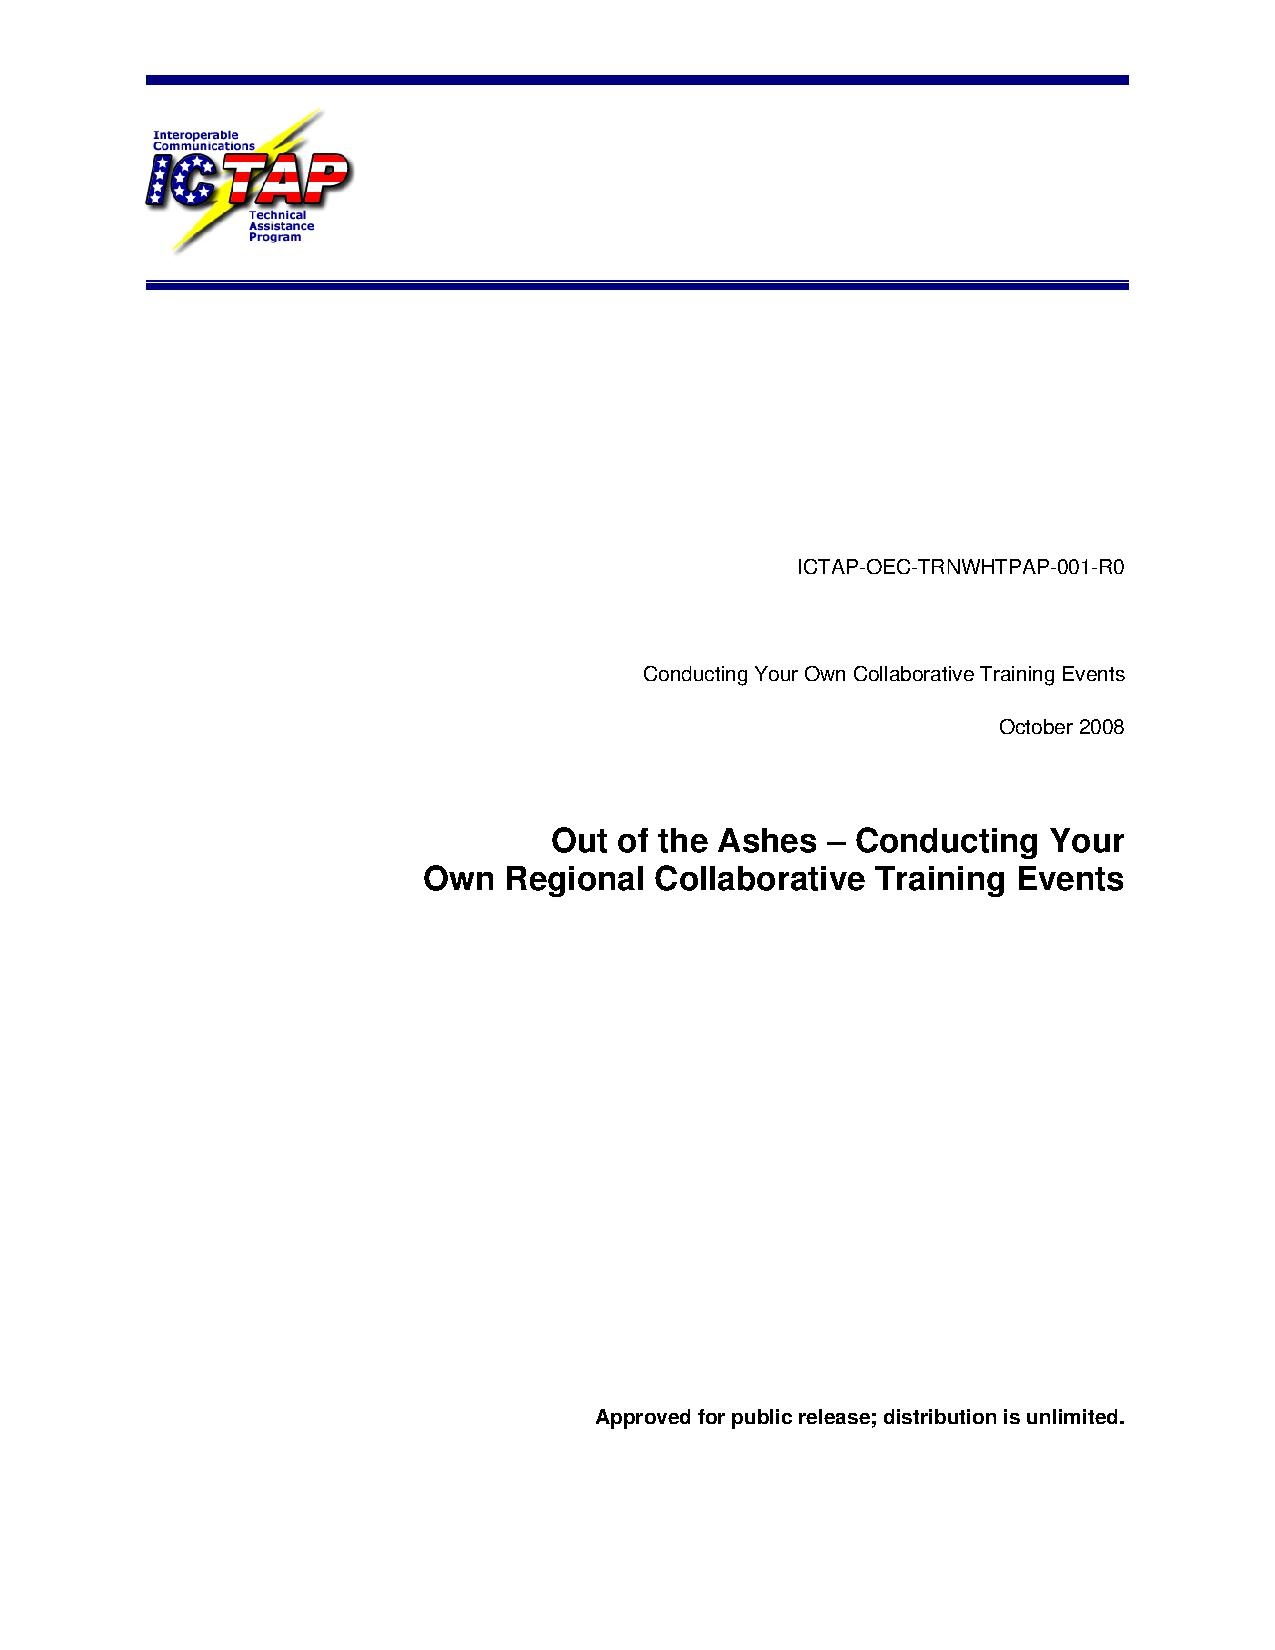 White Paper - Out of the Ashes FINAL.pdf